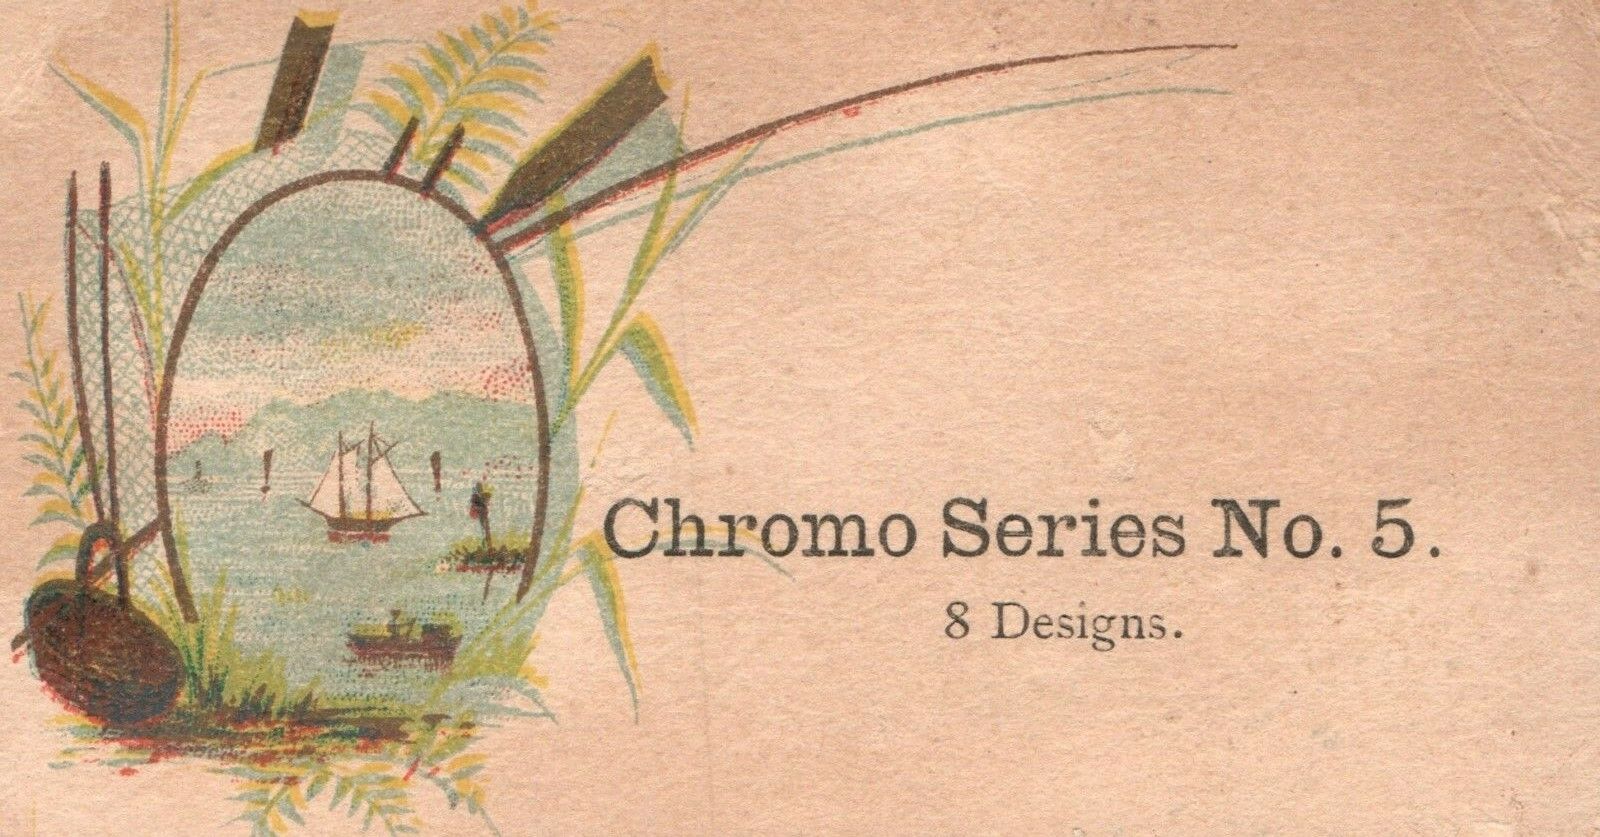 1880s-90s Sailboat on the Water Flowers Chromo Series 8 Designs Trade Card